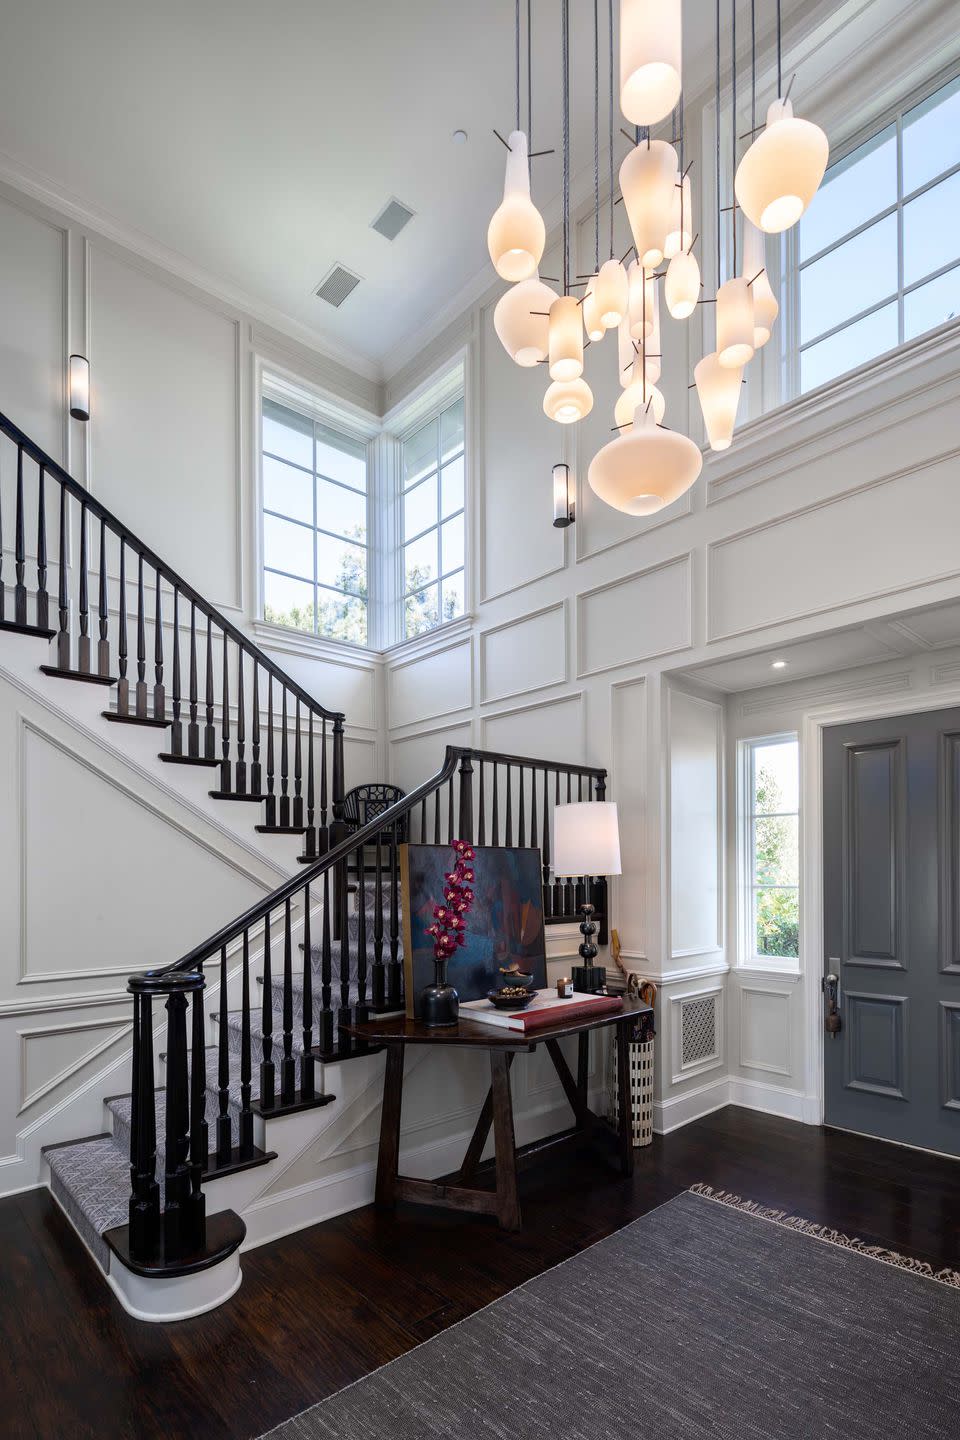 A private garden walkway leads to this two-story formal entry hall.